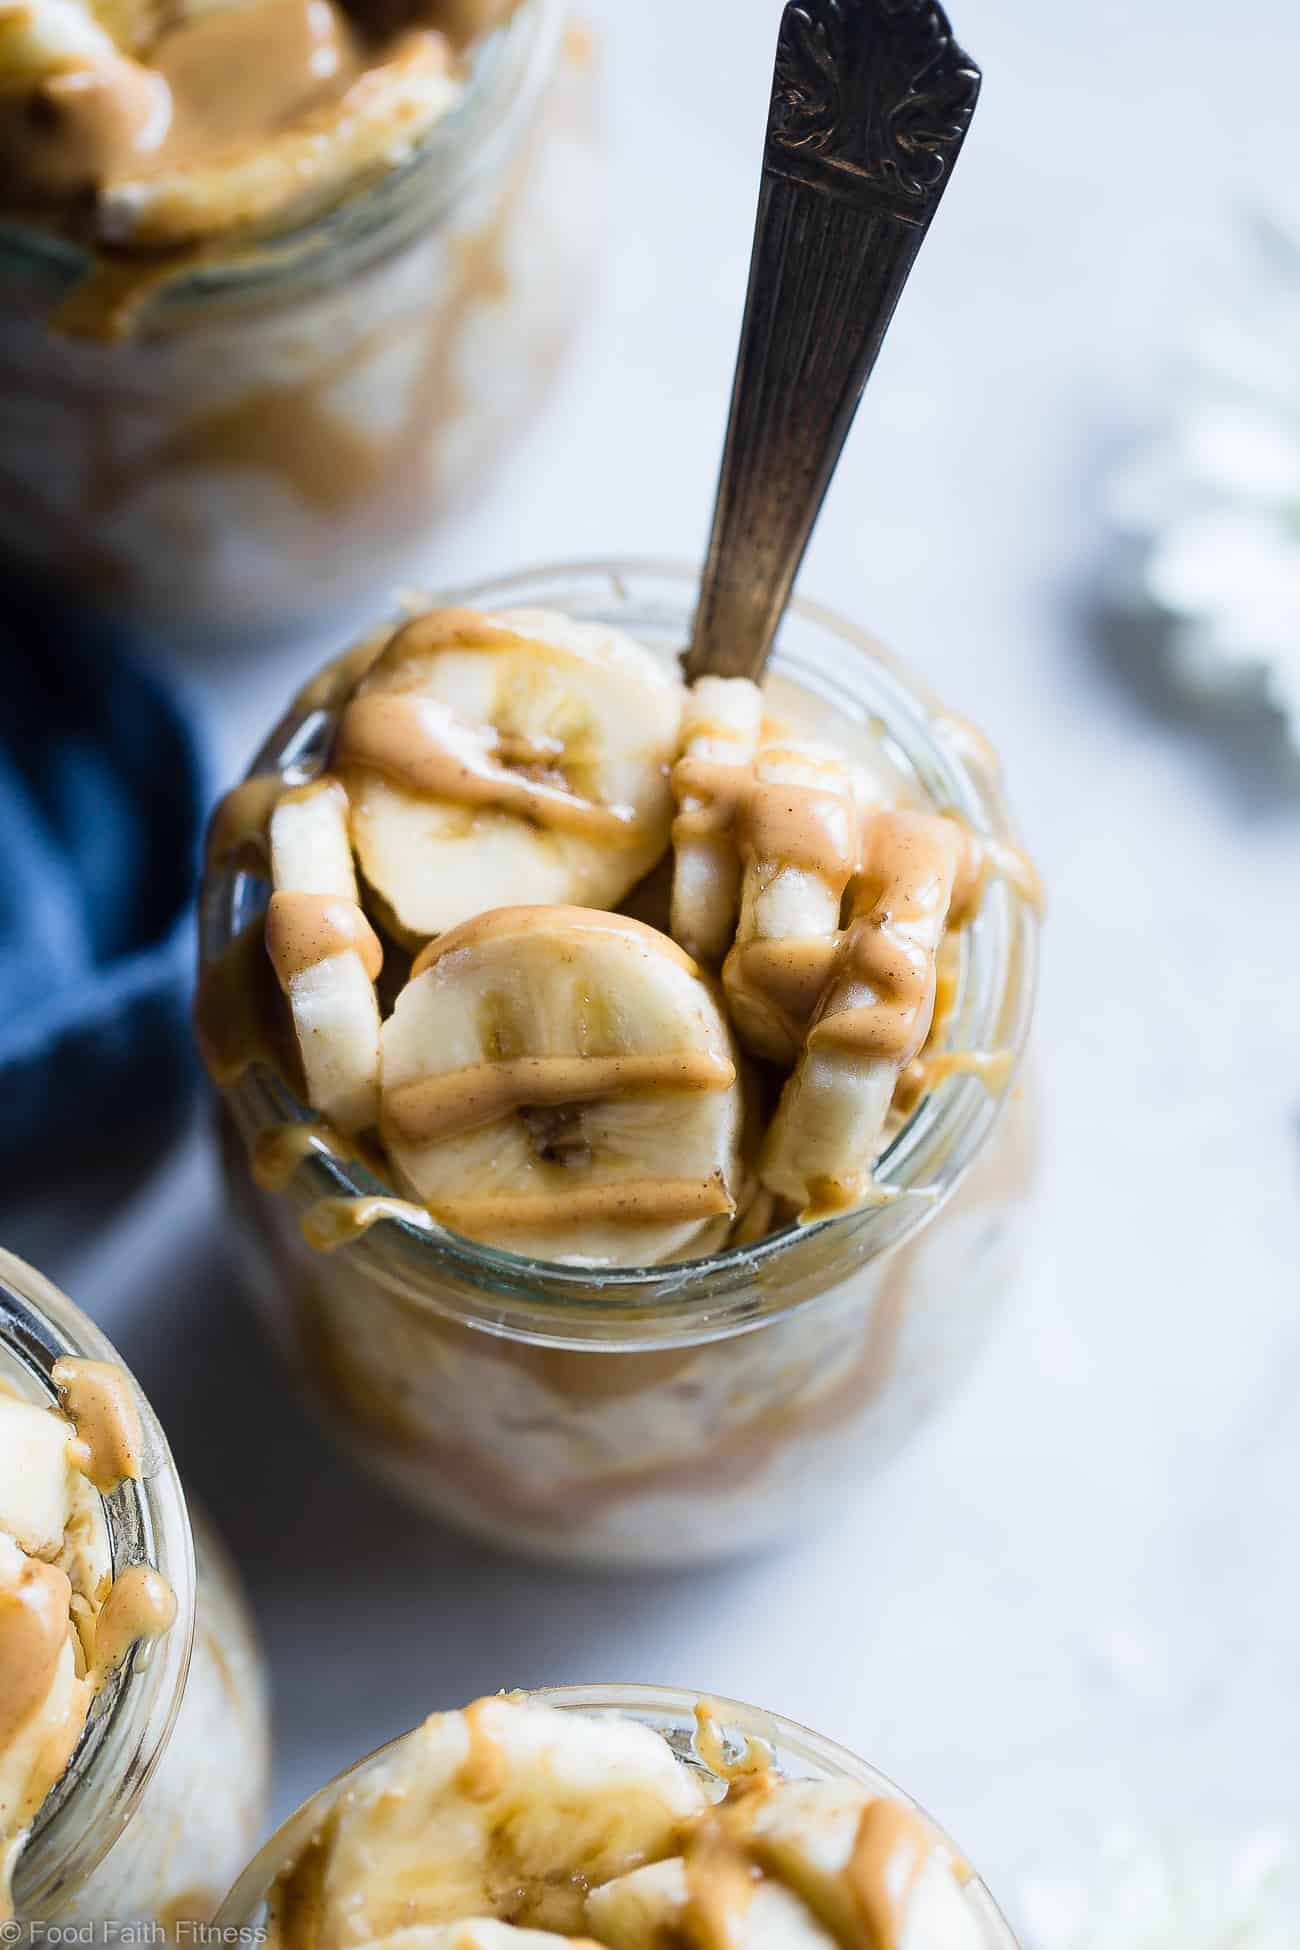 Banana Peanut Butter Overnight Oats - This make ahead, vegan overnight oats recipe is a healthy, 4 ingredient way to start the day! dairy, sugar and, gluten free and kid friendly too! | Foodfaithfitness.com | @FoodFaithFit